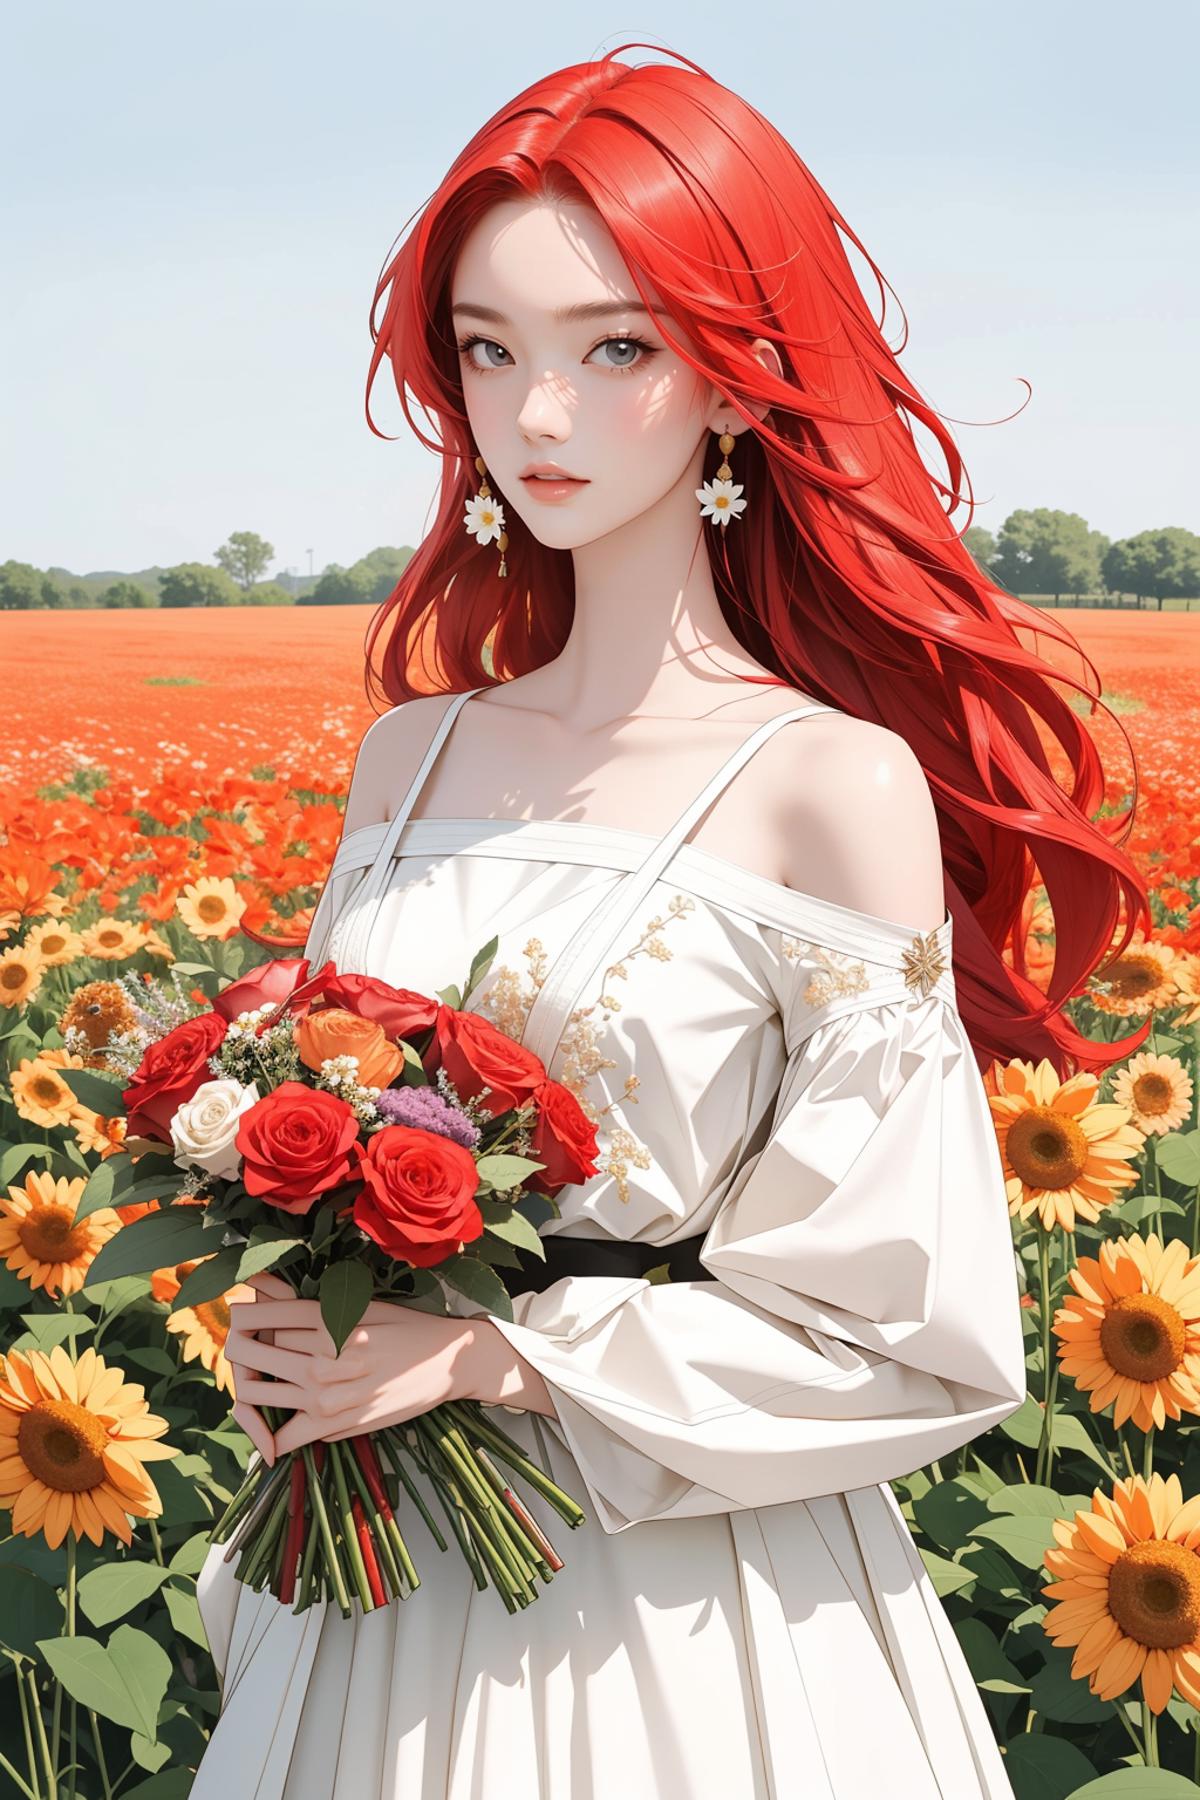 A beautiful red-haired woman in a white dress holding a bouquet of flowers in a field of sunflowers.